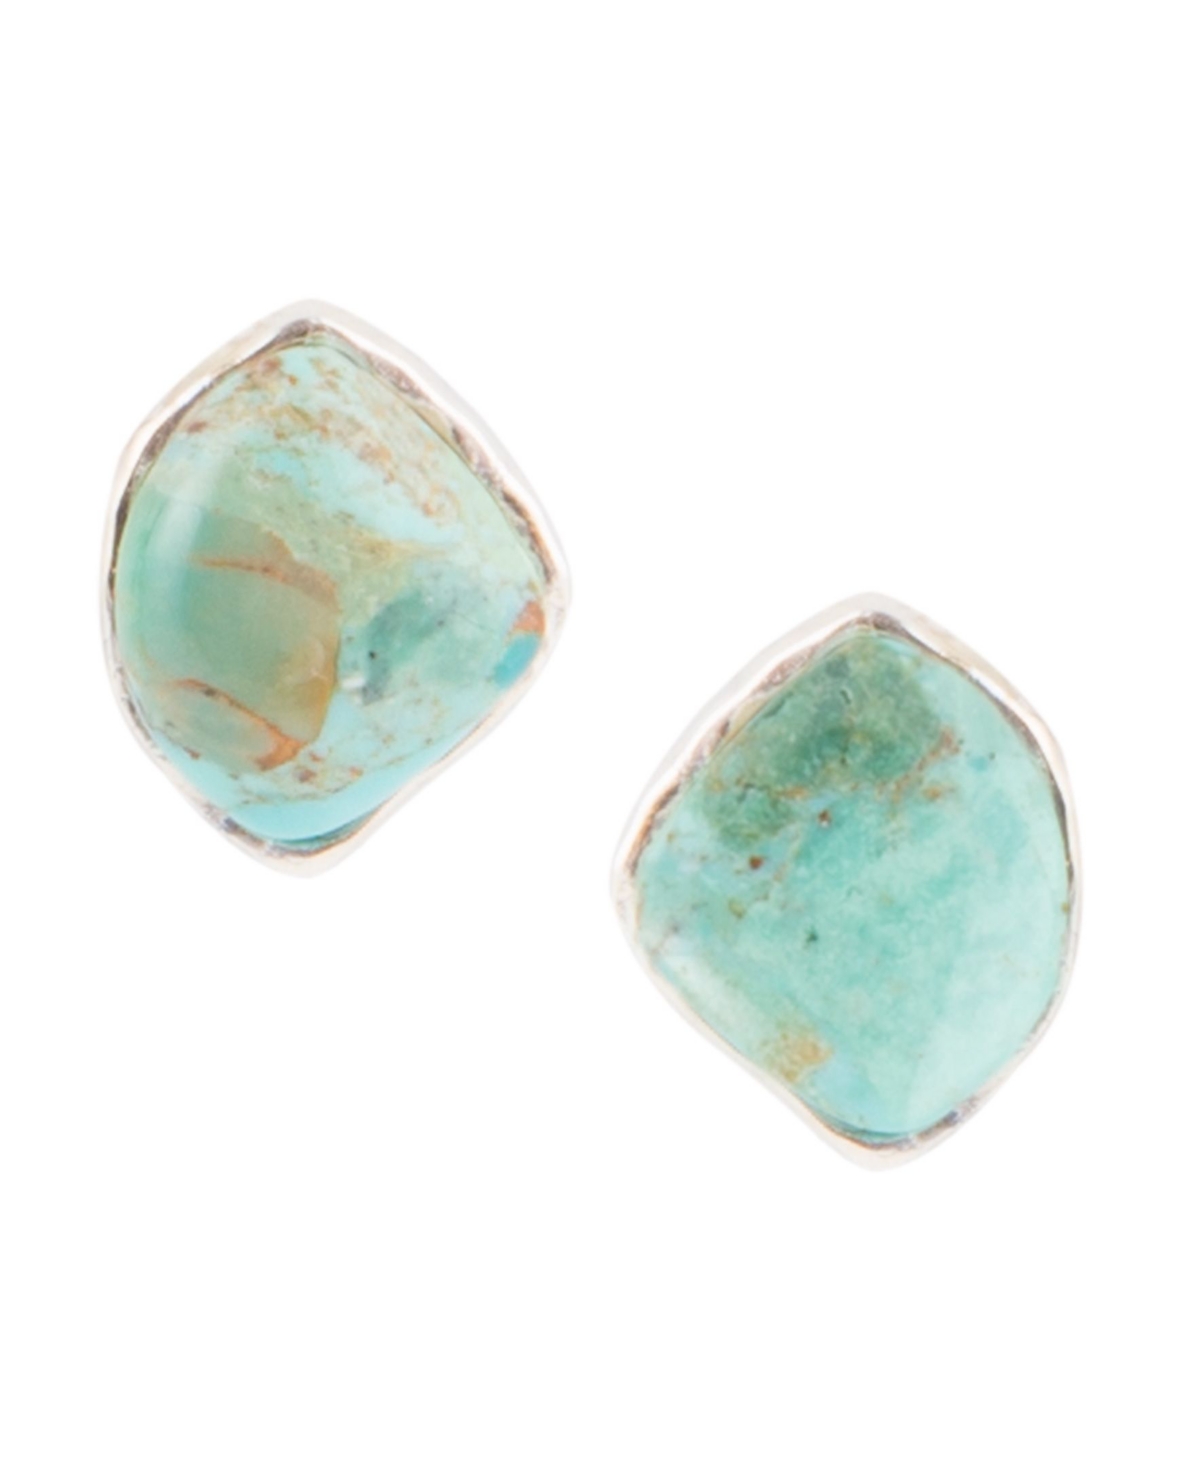 Barse Women's Abstract Sterling Silver and Genuine Turquoise Stud Earrings